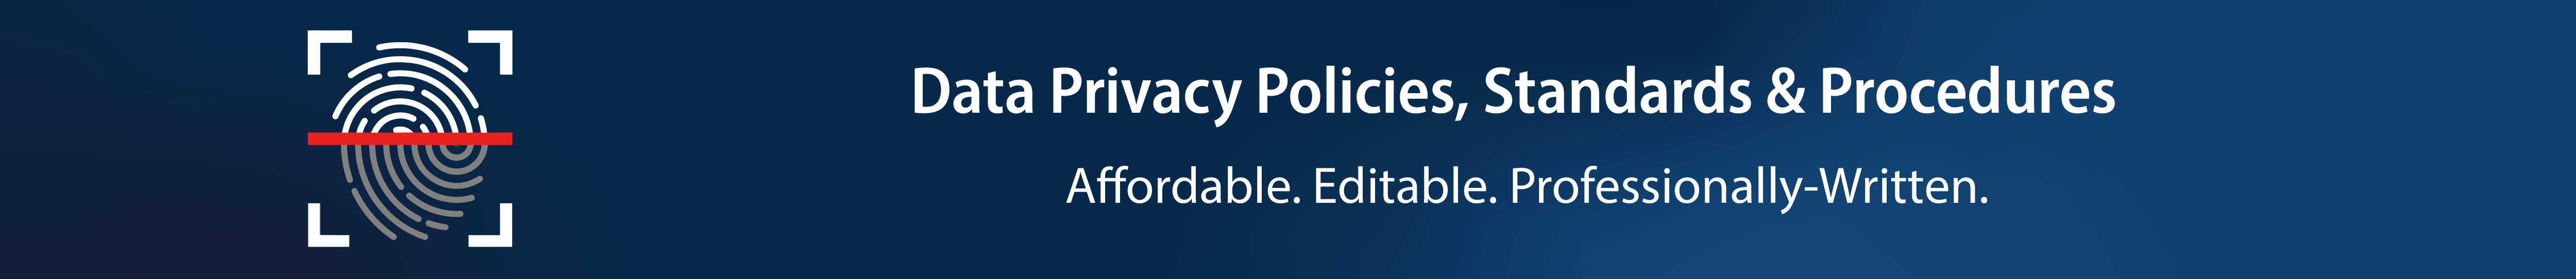 privacy policy development - privacy policies, standards & procedures